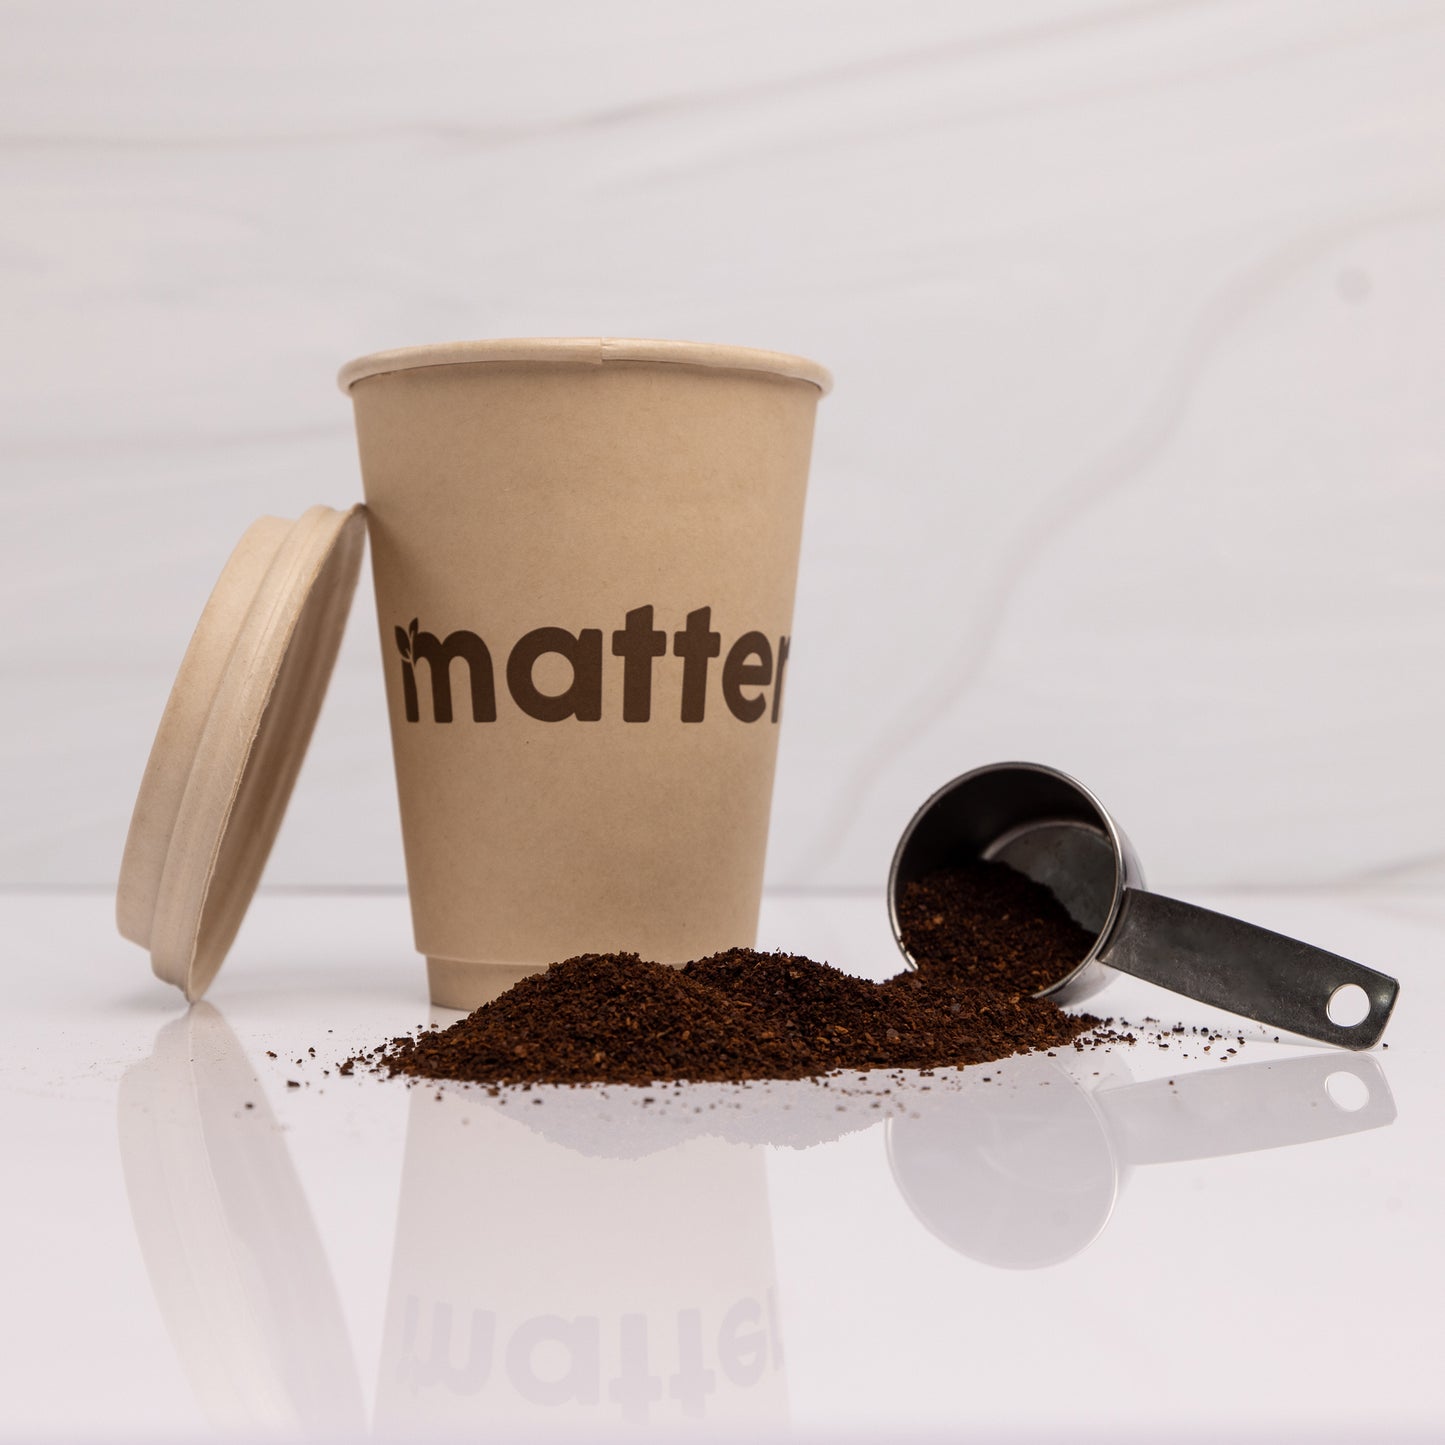 Matter Compostable Hot 12oz Cups with Lids - 10 Count